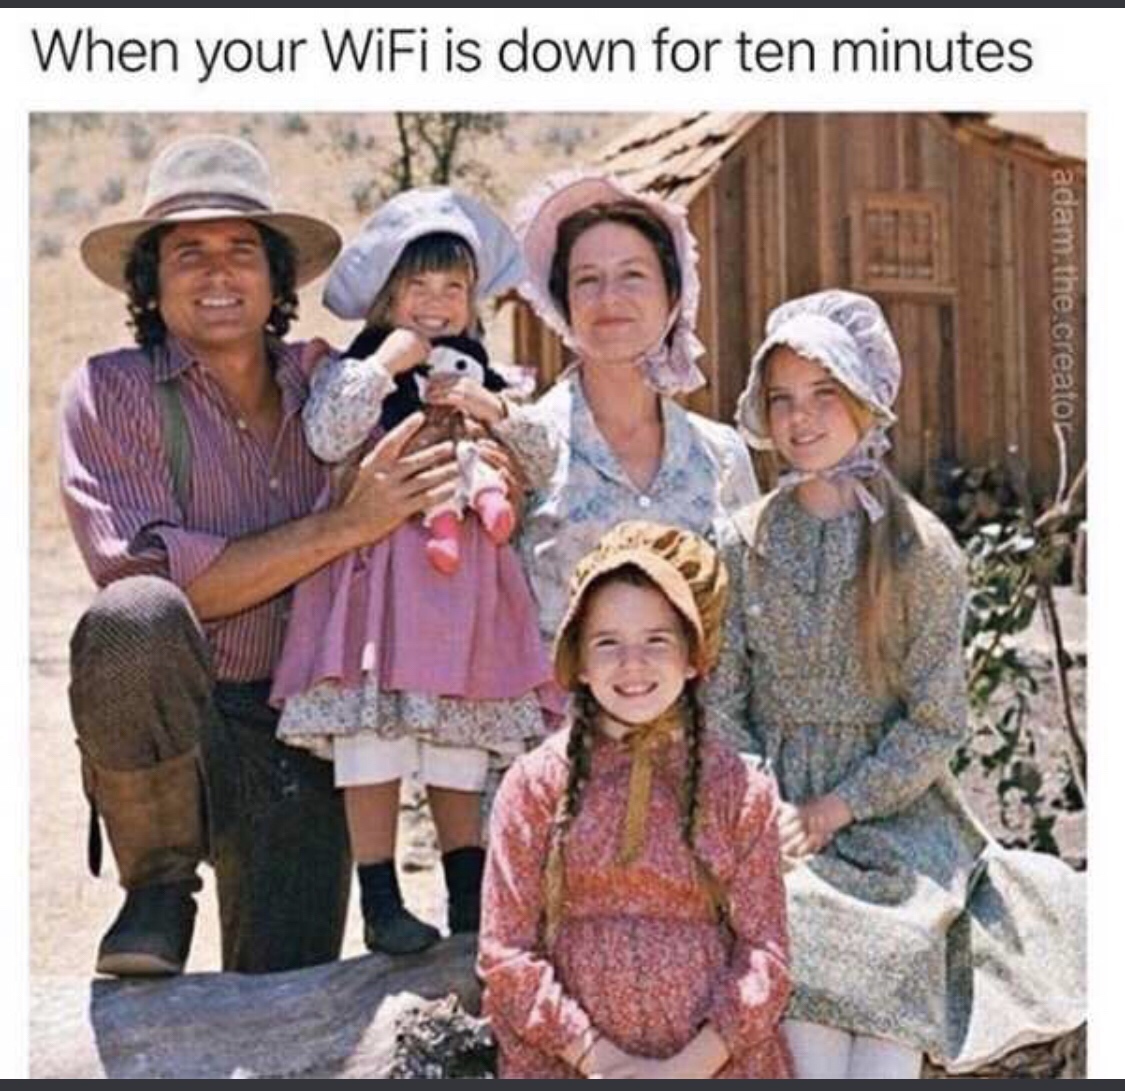 little house on the prairie wifi meme - When your WiFi is down for ten minutes adam the creator